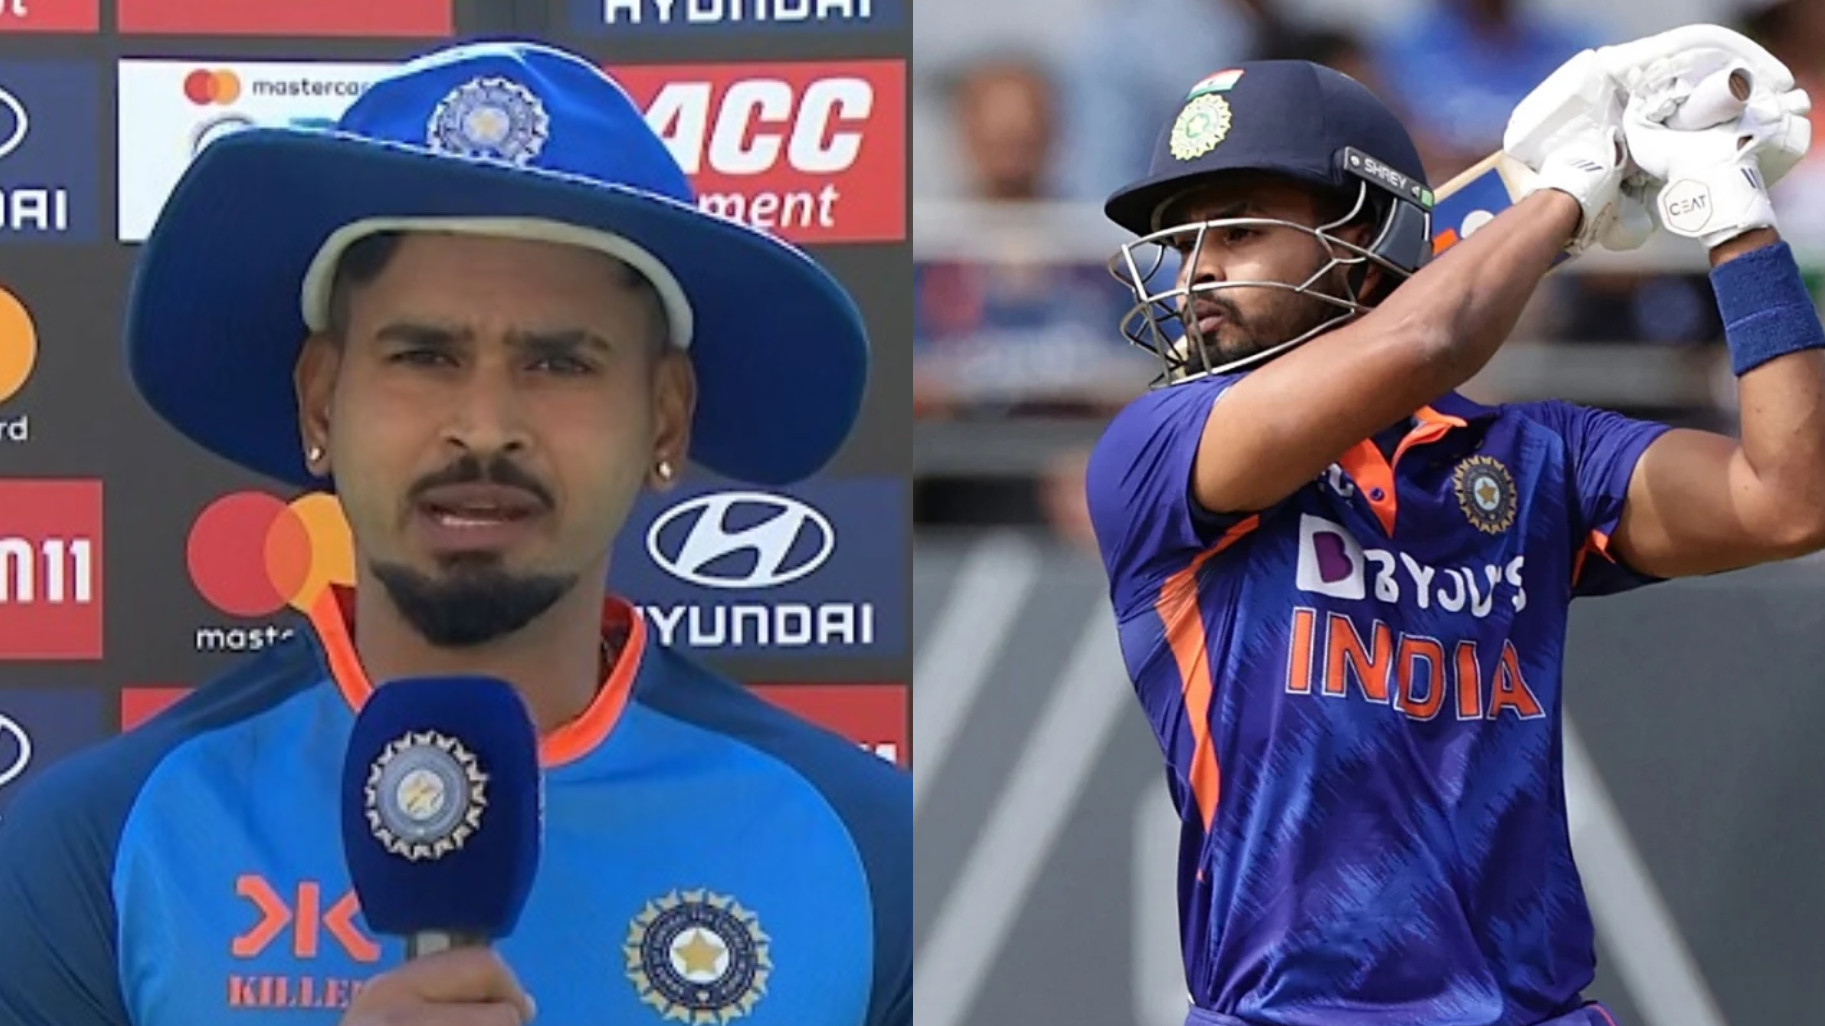 IND v SL 2023: ‘I know I need to try to focus on myself, turn deaf ear to outside noise’- Shreyas Iyer